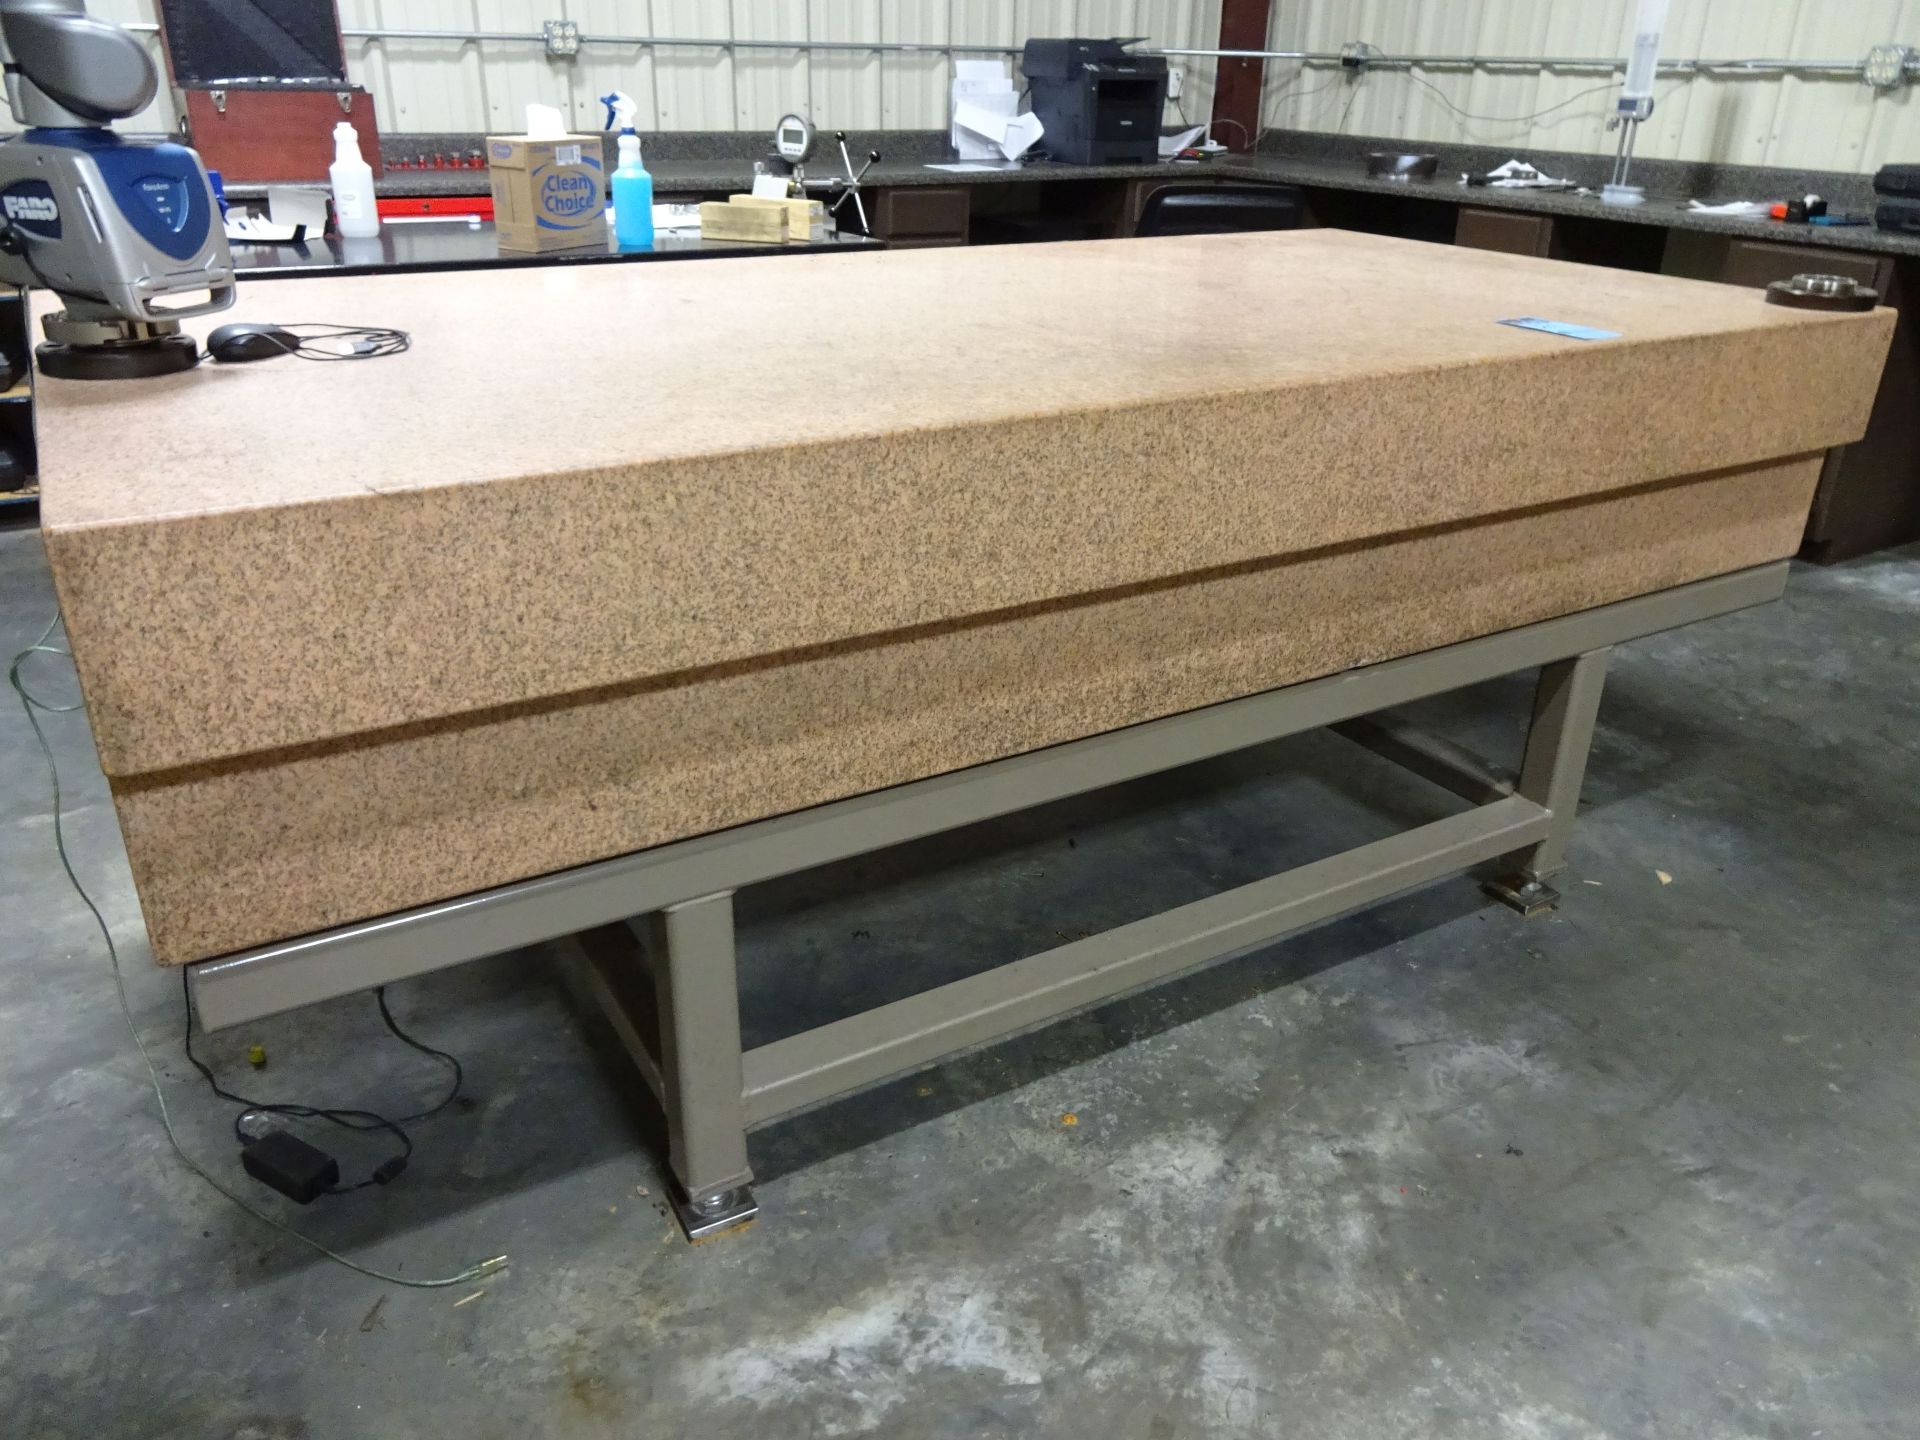 8' X 4' X 16" THICK STARRETT PINK GRANITE SURFACE PLATE - LOADING CHARGE DUE TO INDUSTRIAL SERVICES